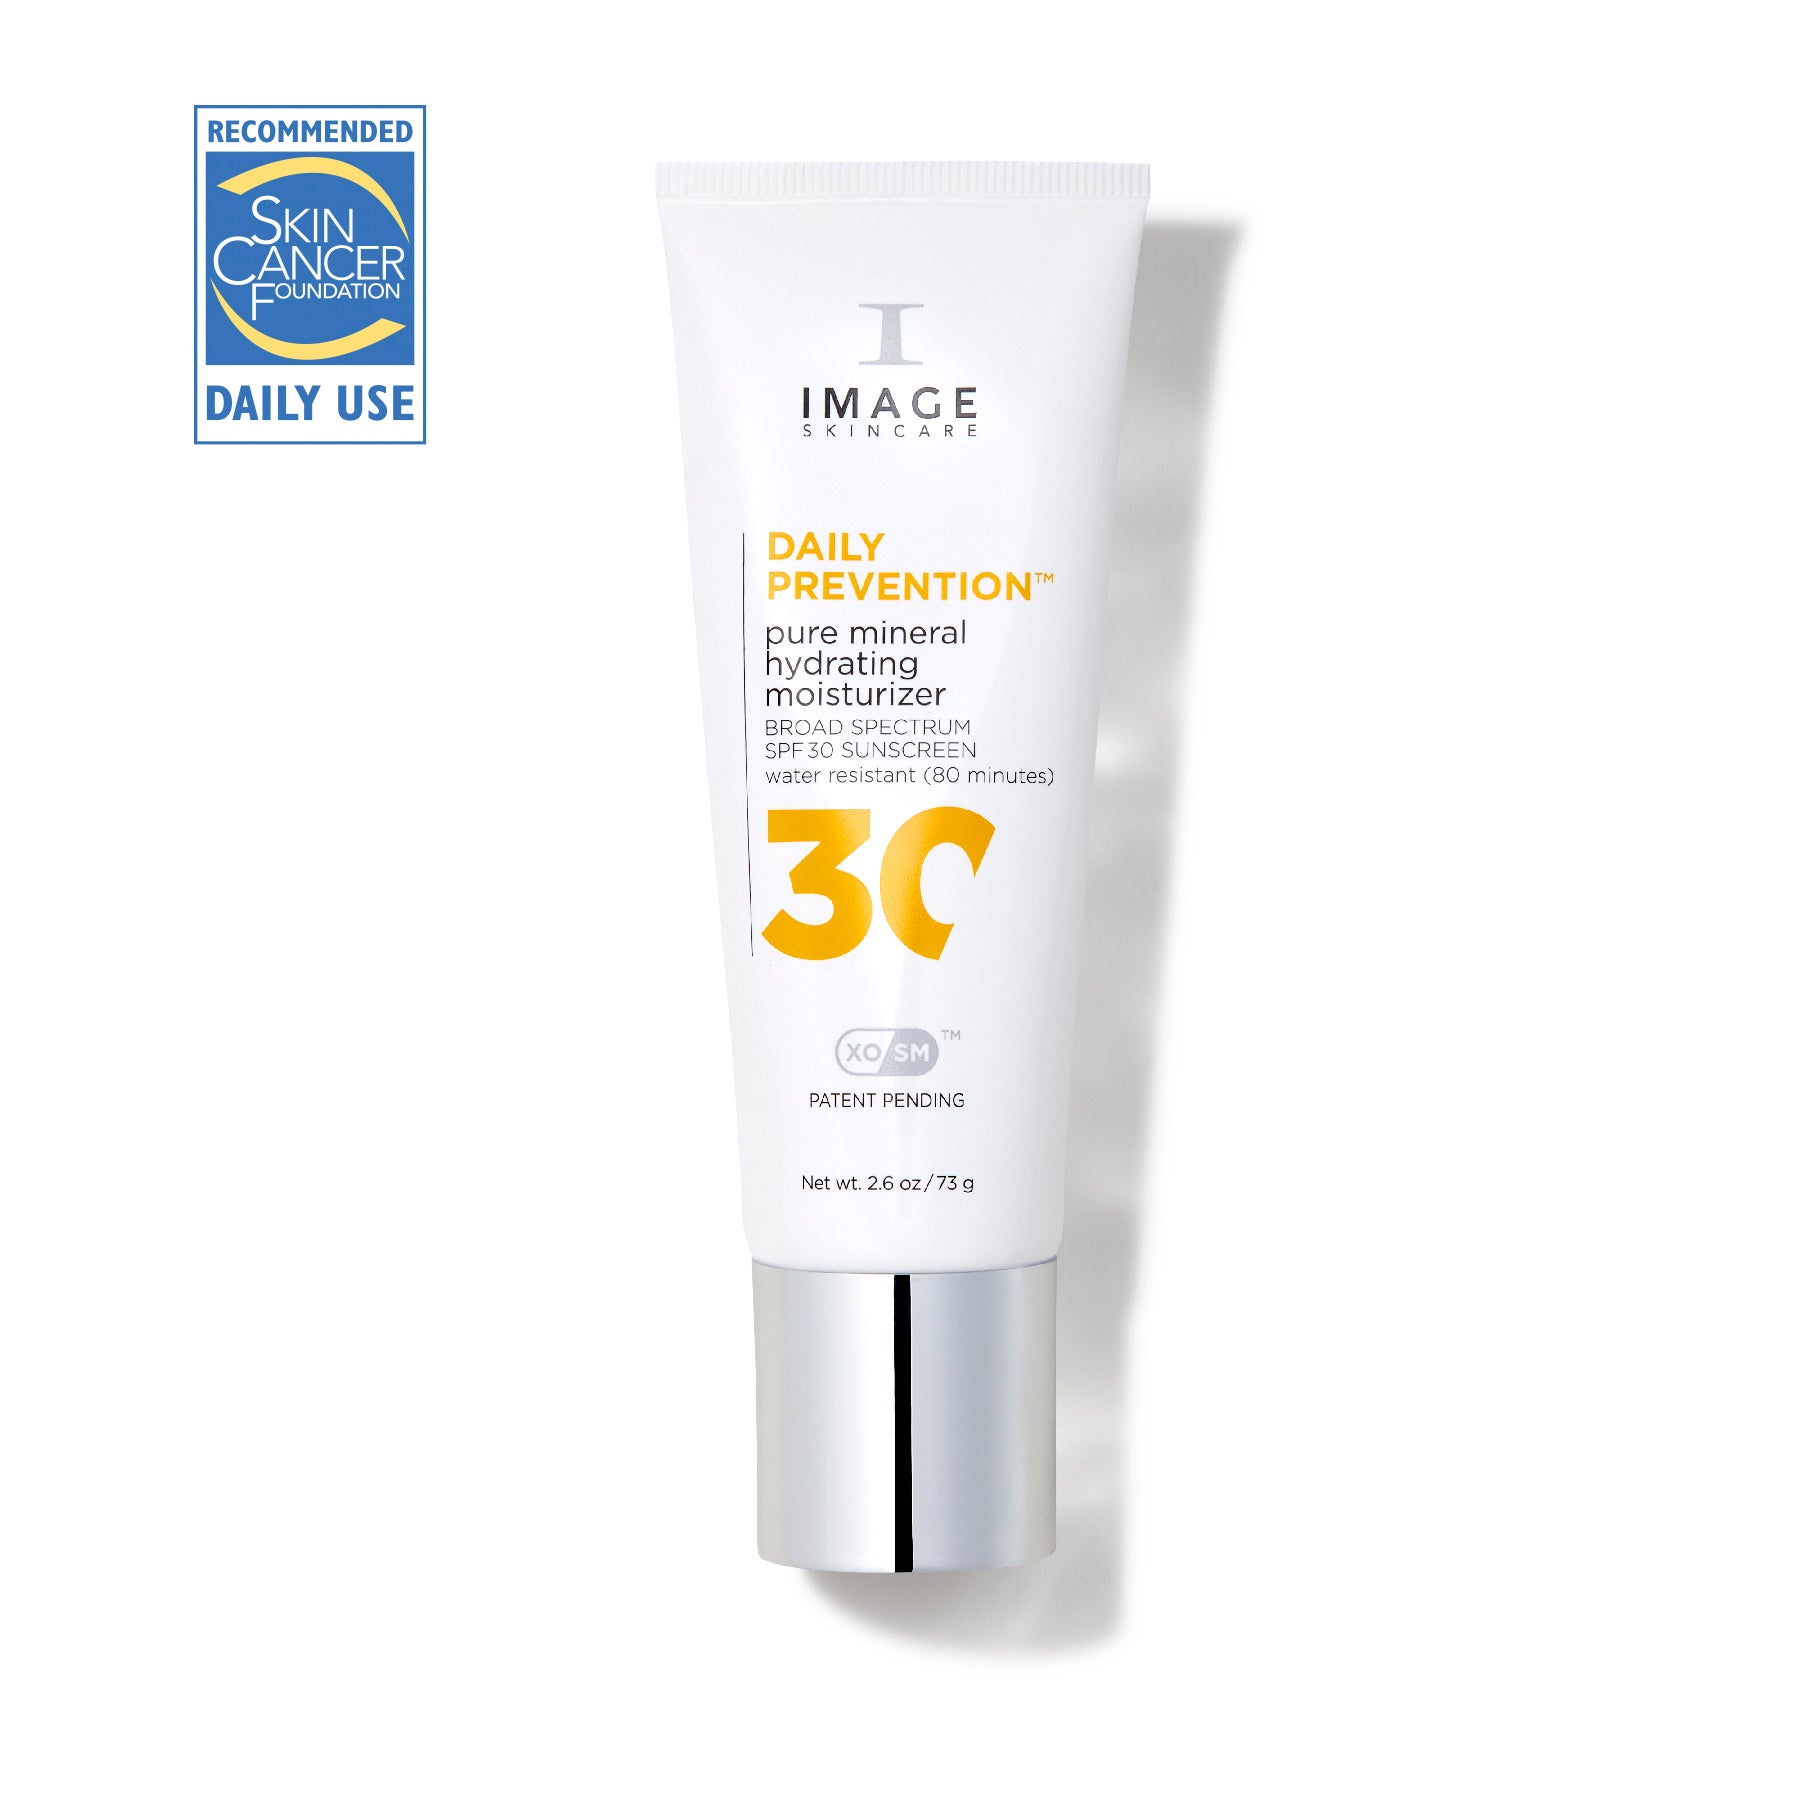 Tube of DAILY PREVENTION pure mineral hydrating face moisturizer with sunscreen SPF 30.